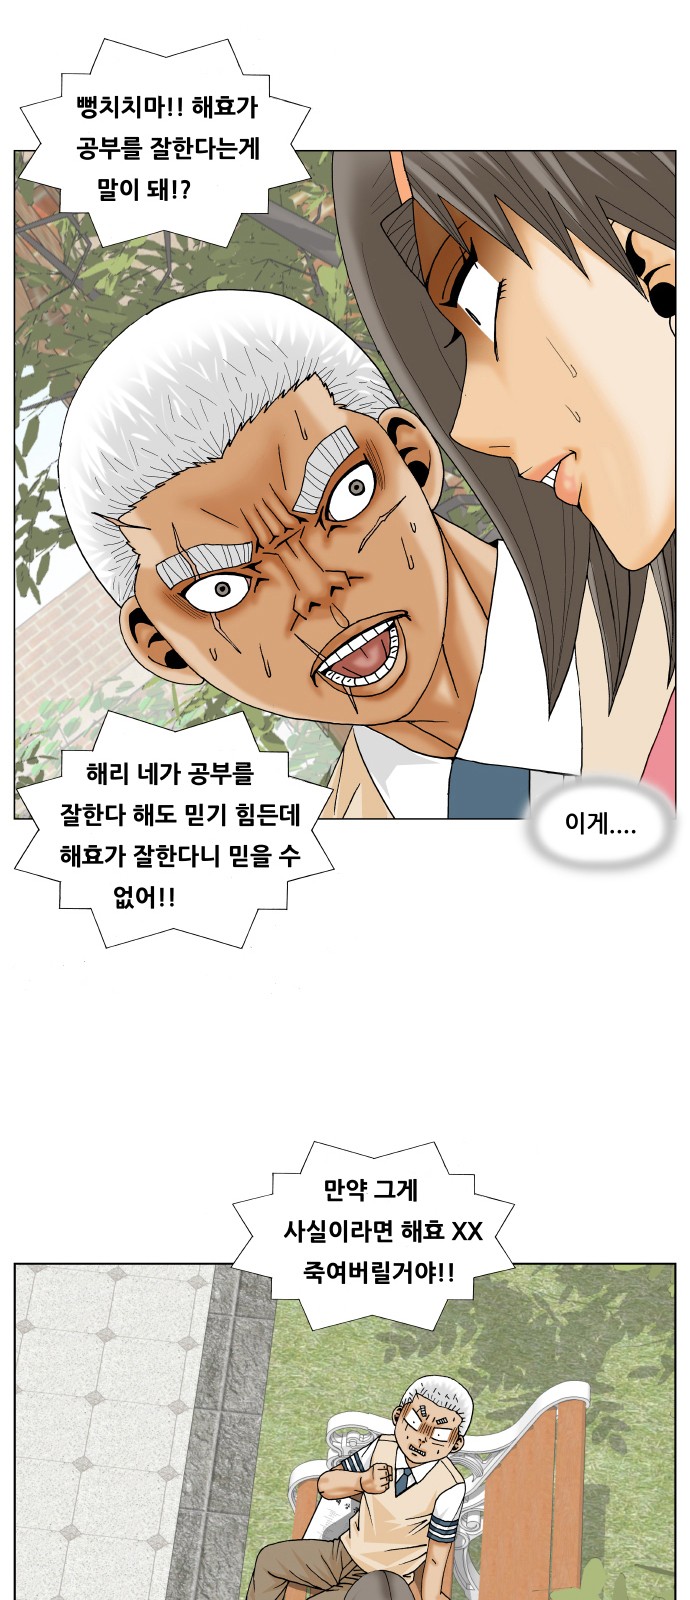 Ultimate Legend - Kang Hae Hyo - Chapter 270 - Page 2